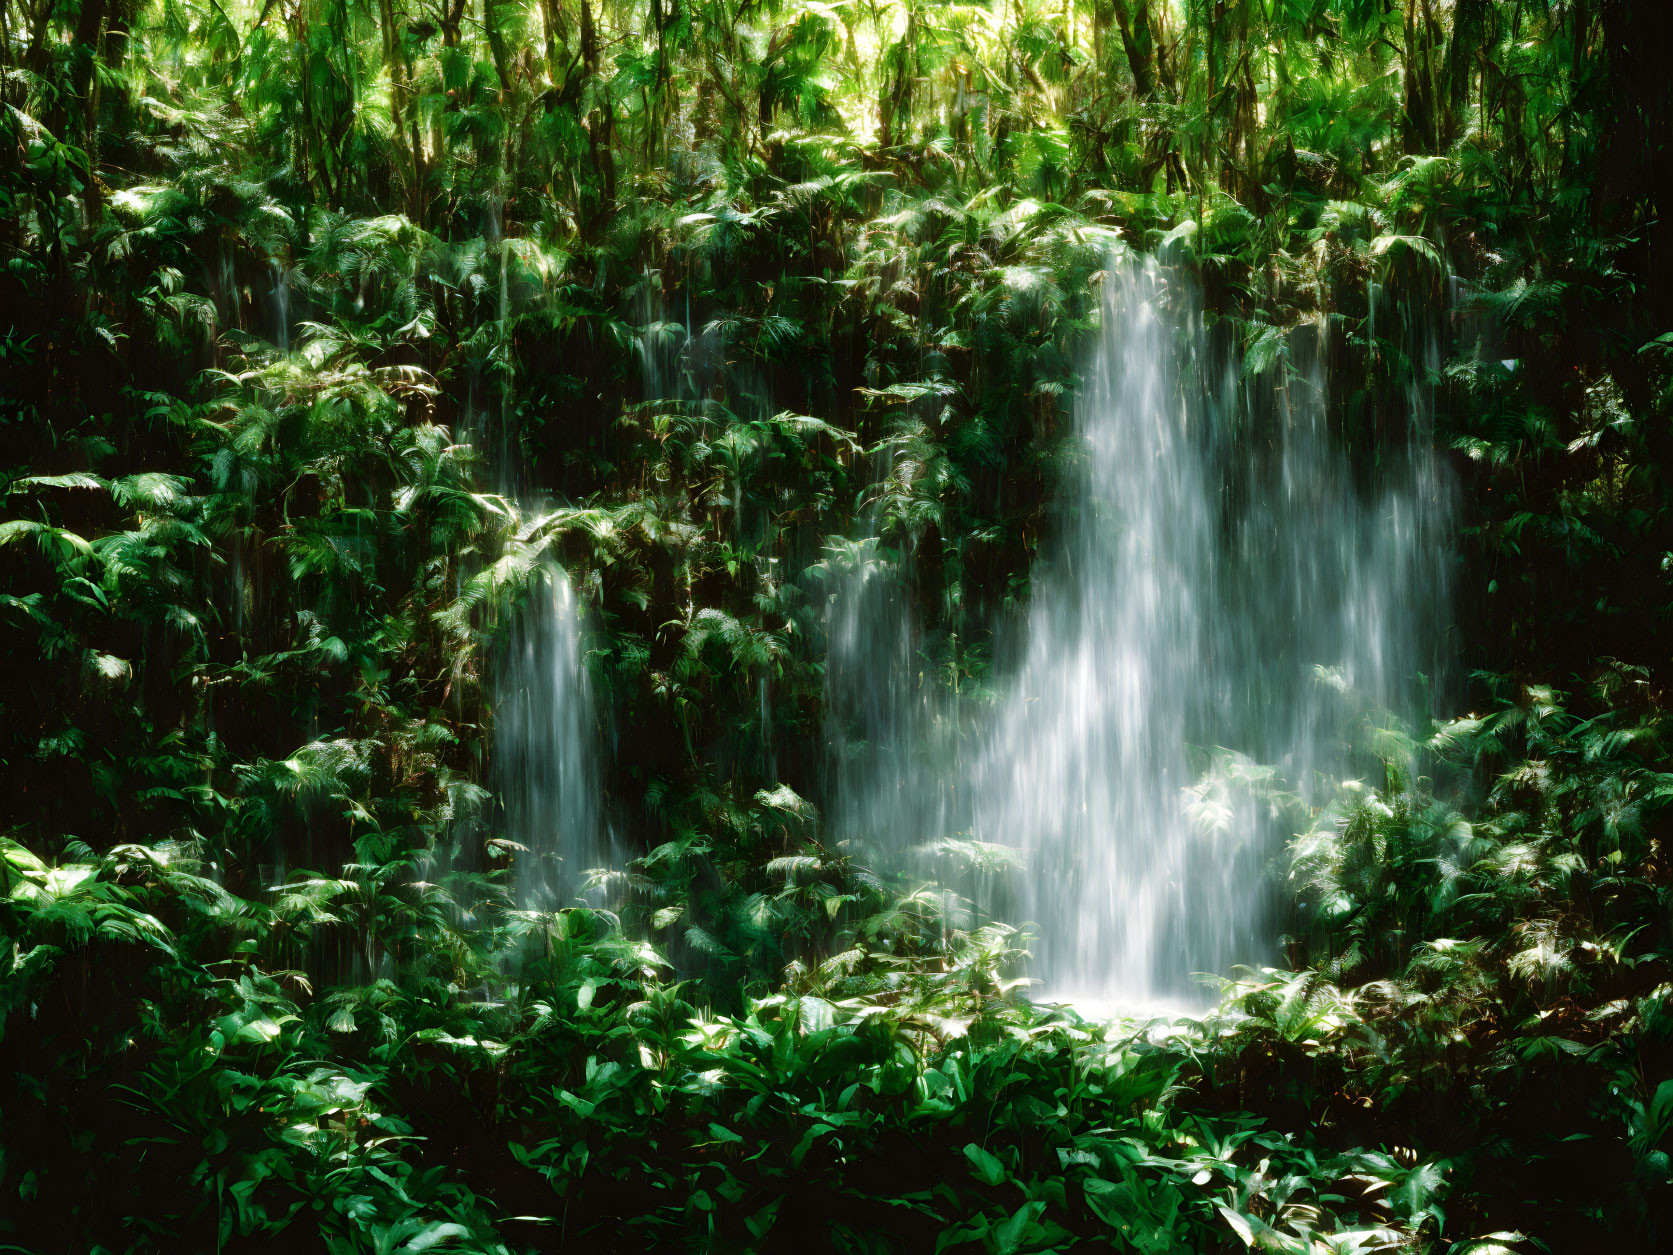 Tranquil waterfall in lush green forest landscape